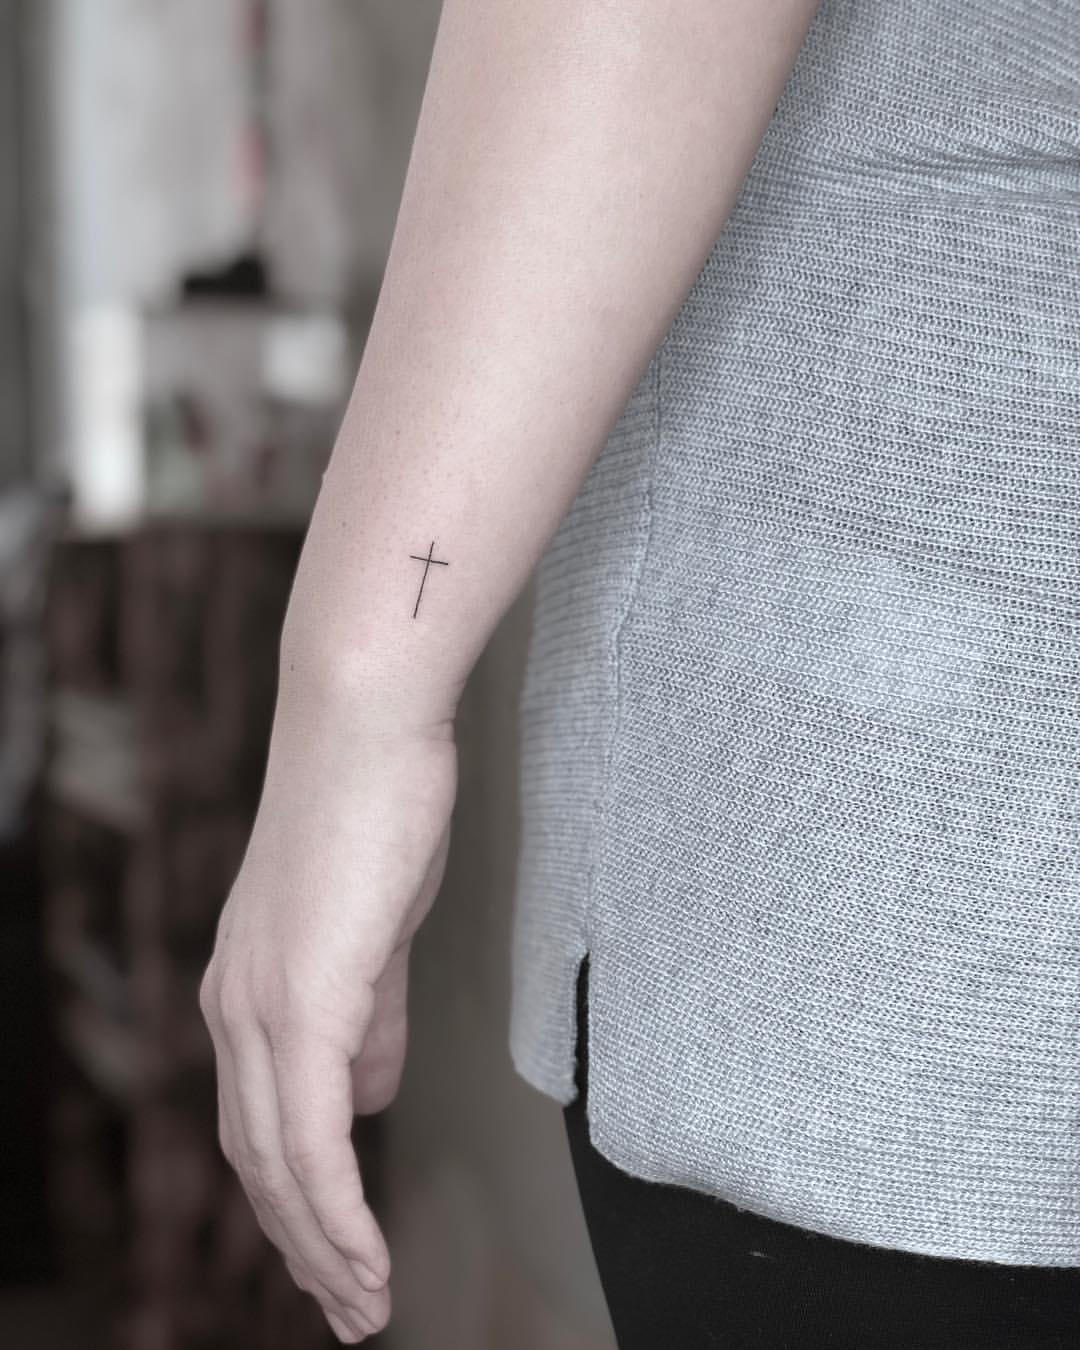 Subtly Simple Cross Small Tattoo On The Arm